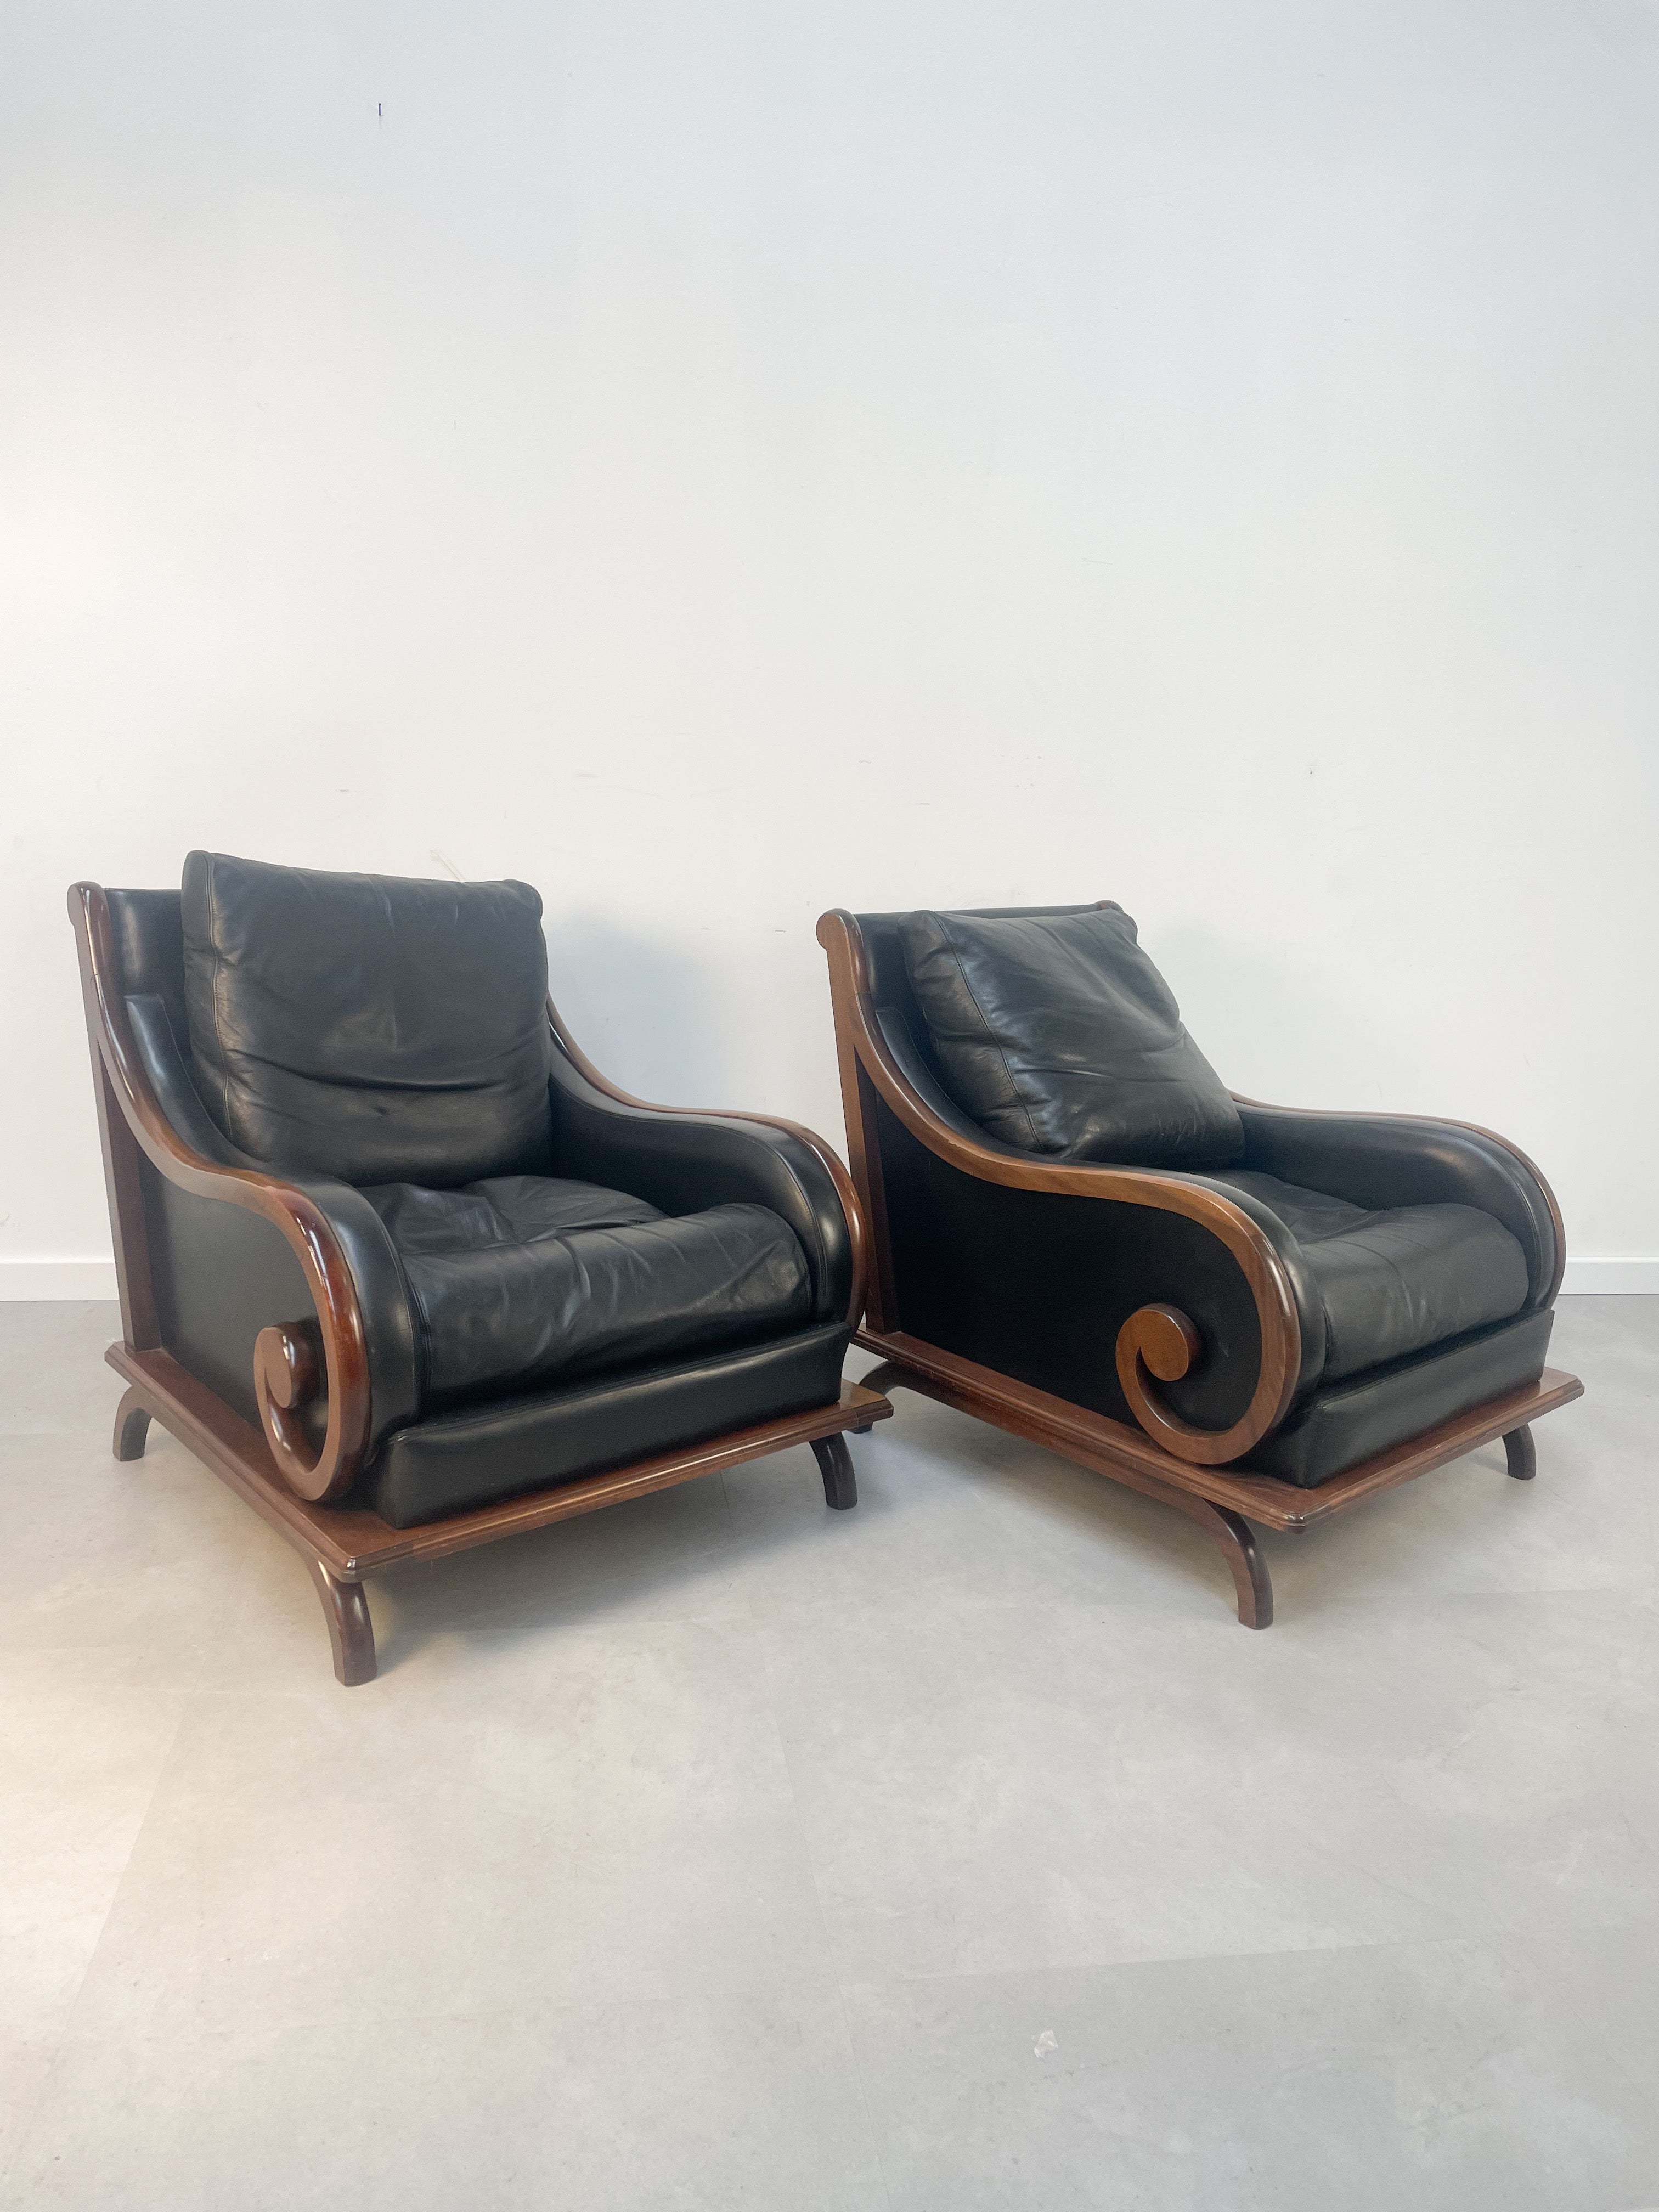 Leather curly relaxchair